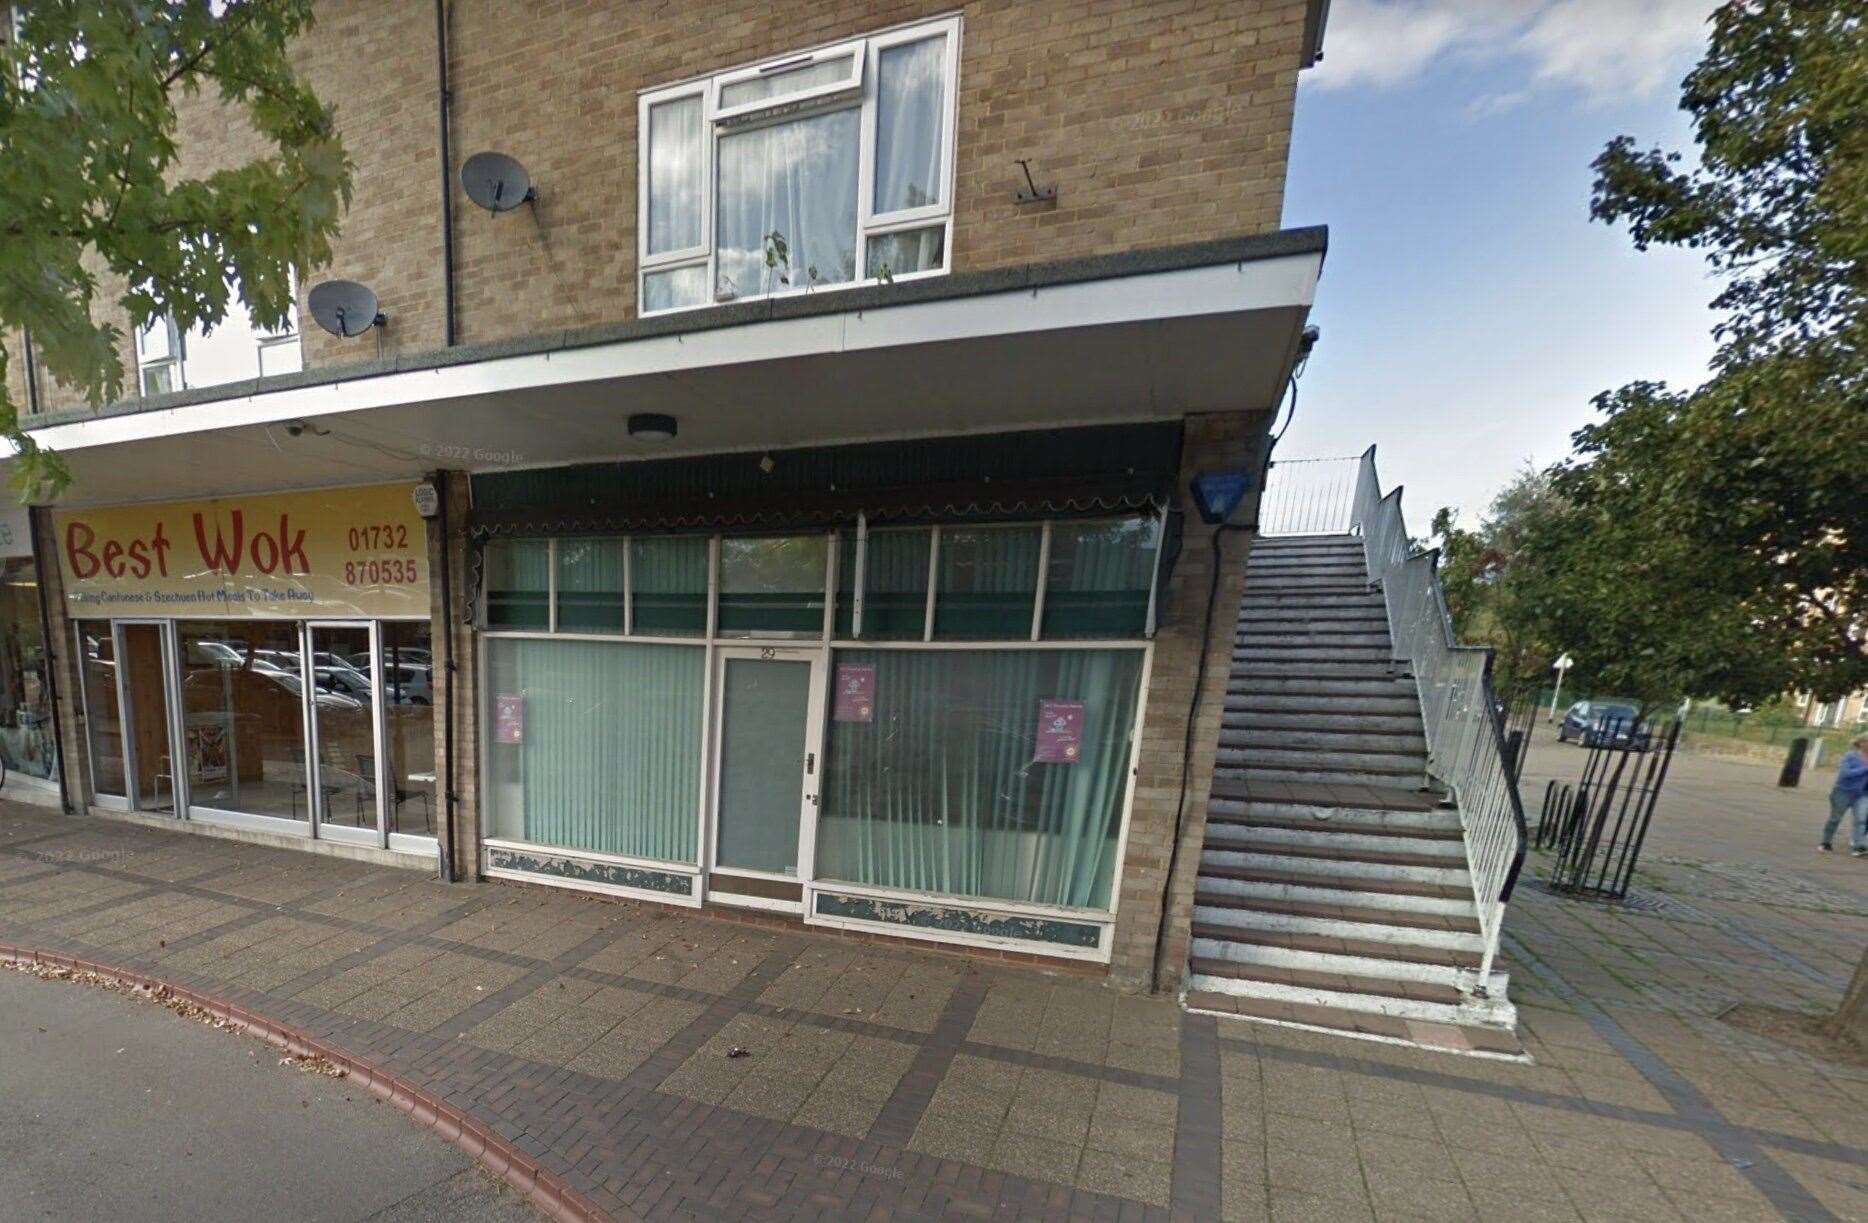 The empty unit in Martin Square in Larkfield. Picture: Google Street View